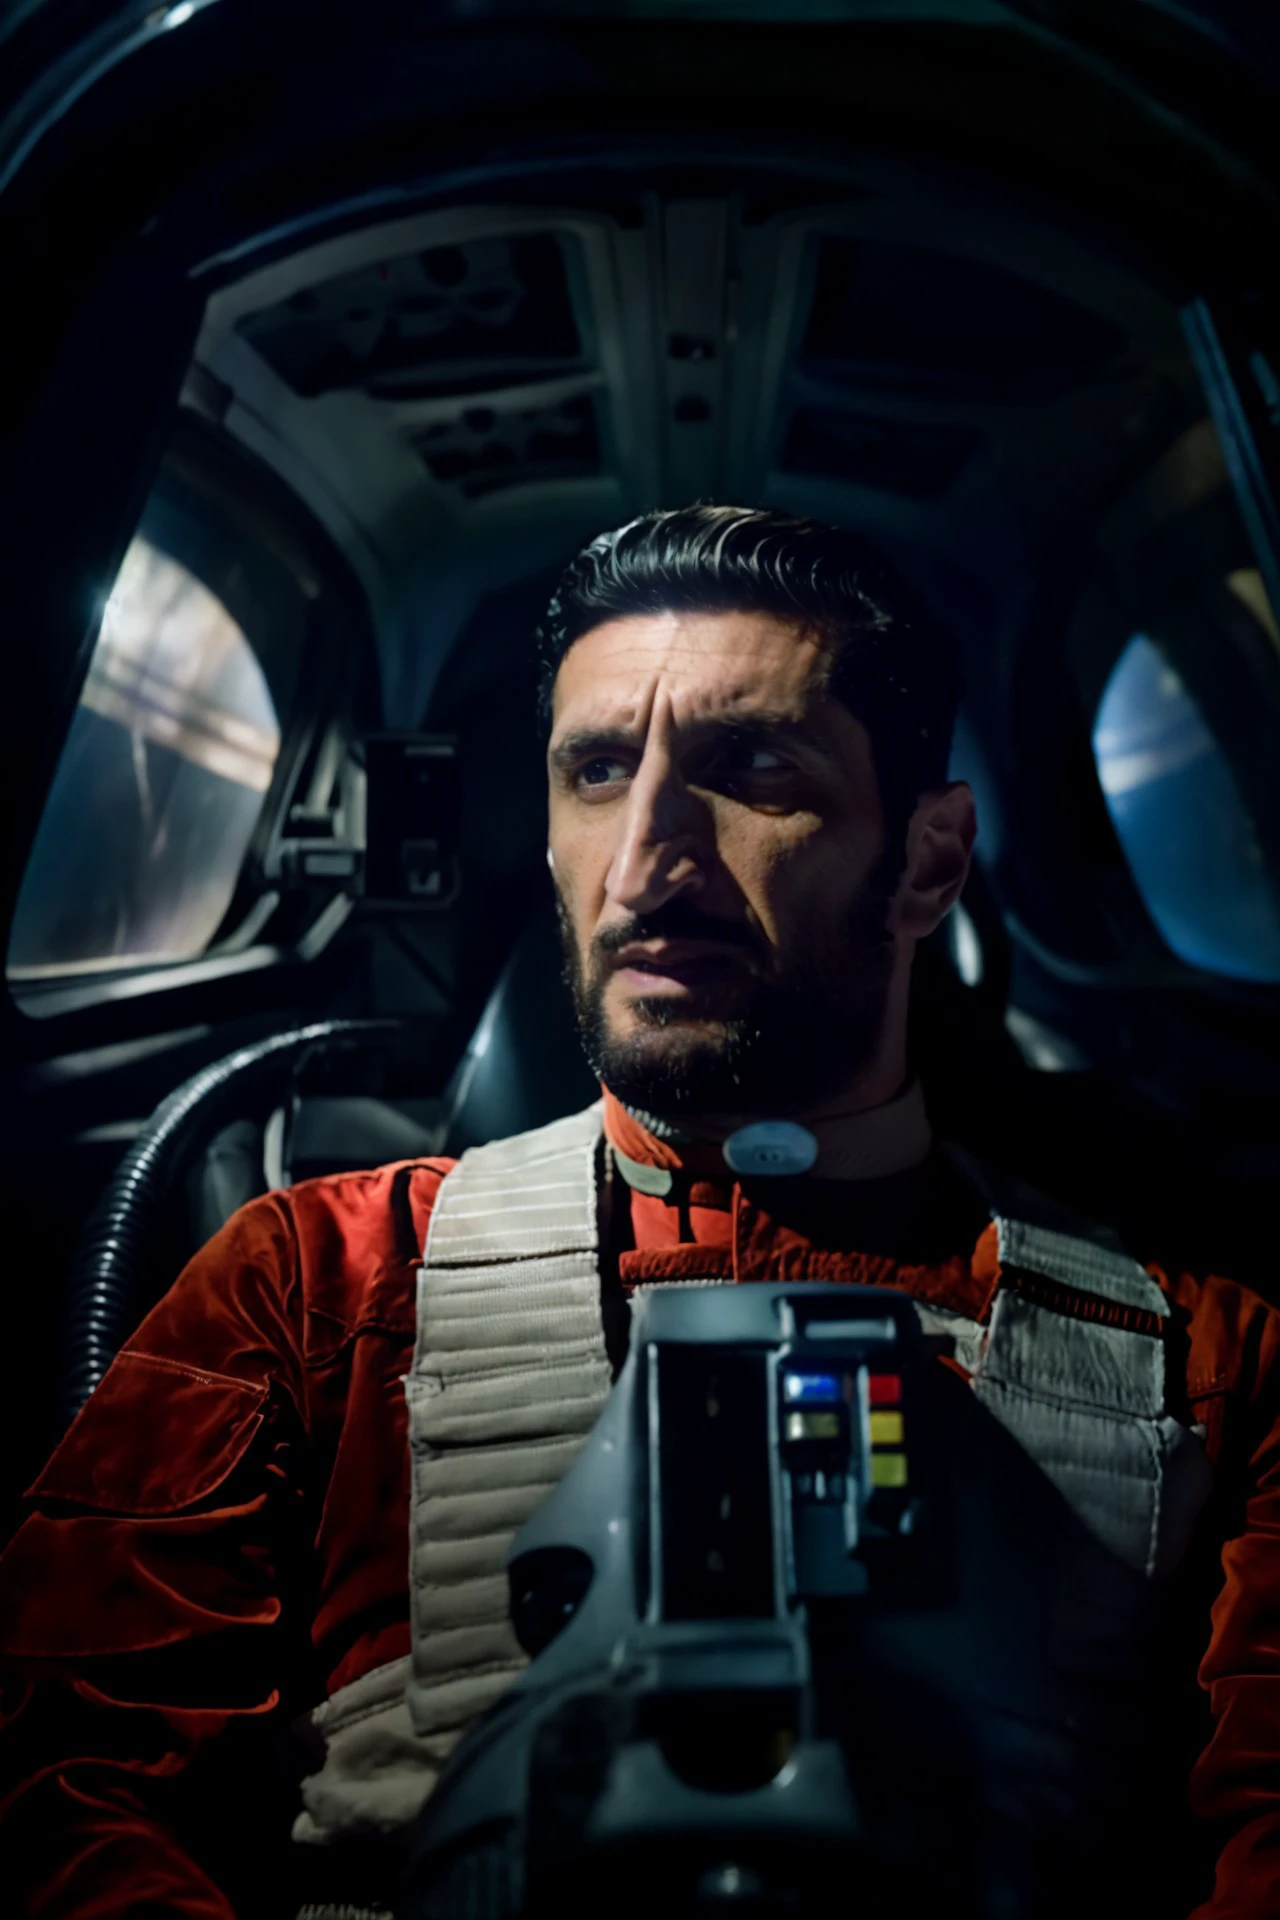 (Fares Fares:1.2) man with a (slicked-back hair:1.3) wearing a rebel pilot suit, inside a cockpit with one big wide panel (curved oval windows:1.2) showing the dark space, bright stars 4k uhd, dslr, soft light, high quality, Fujifilm XT3  